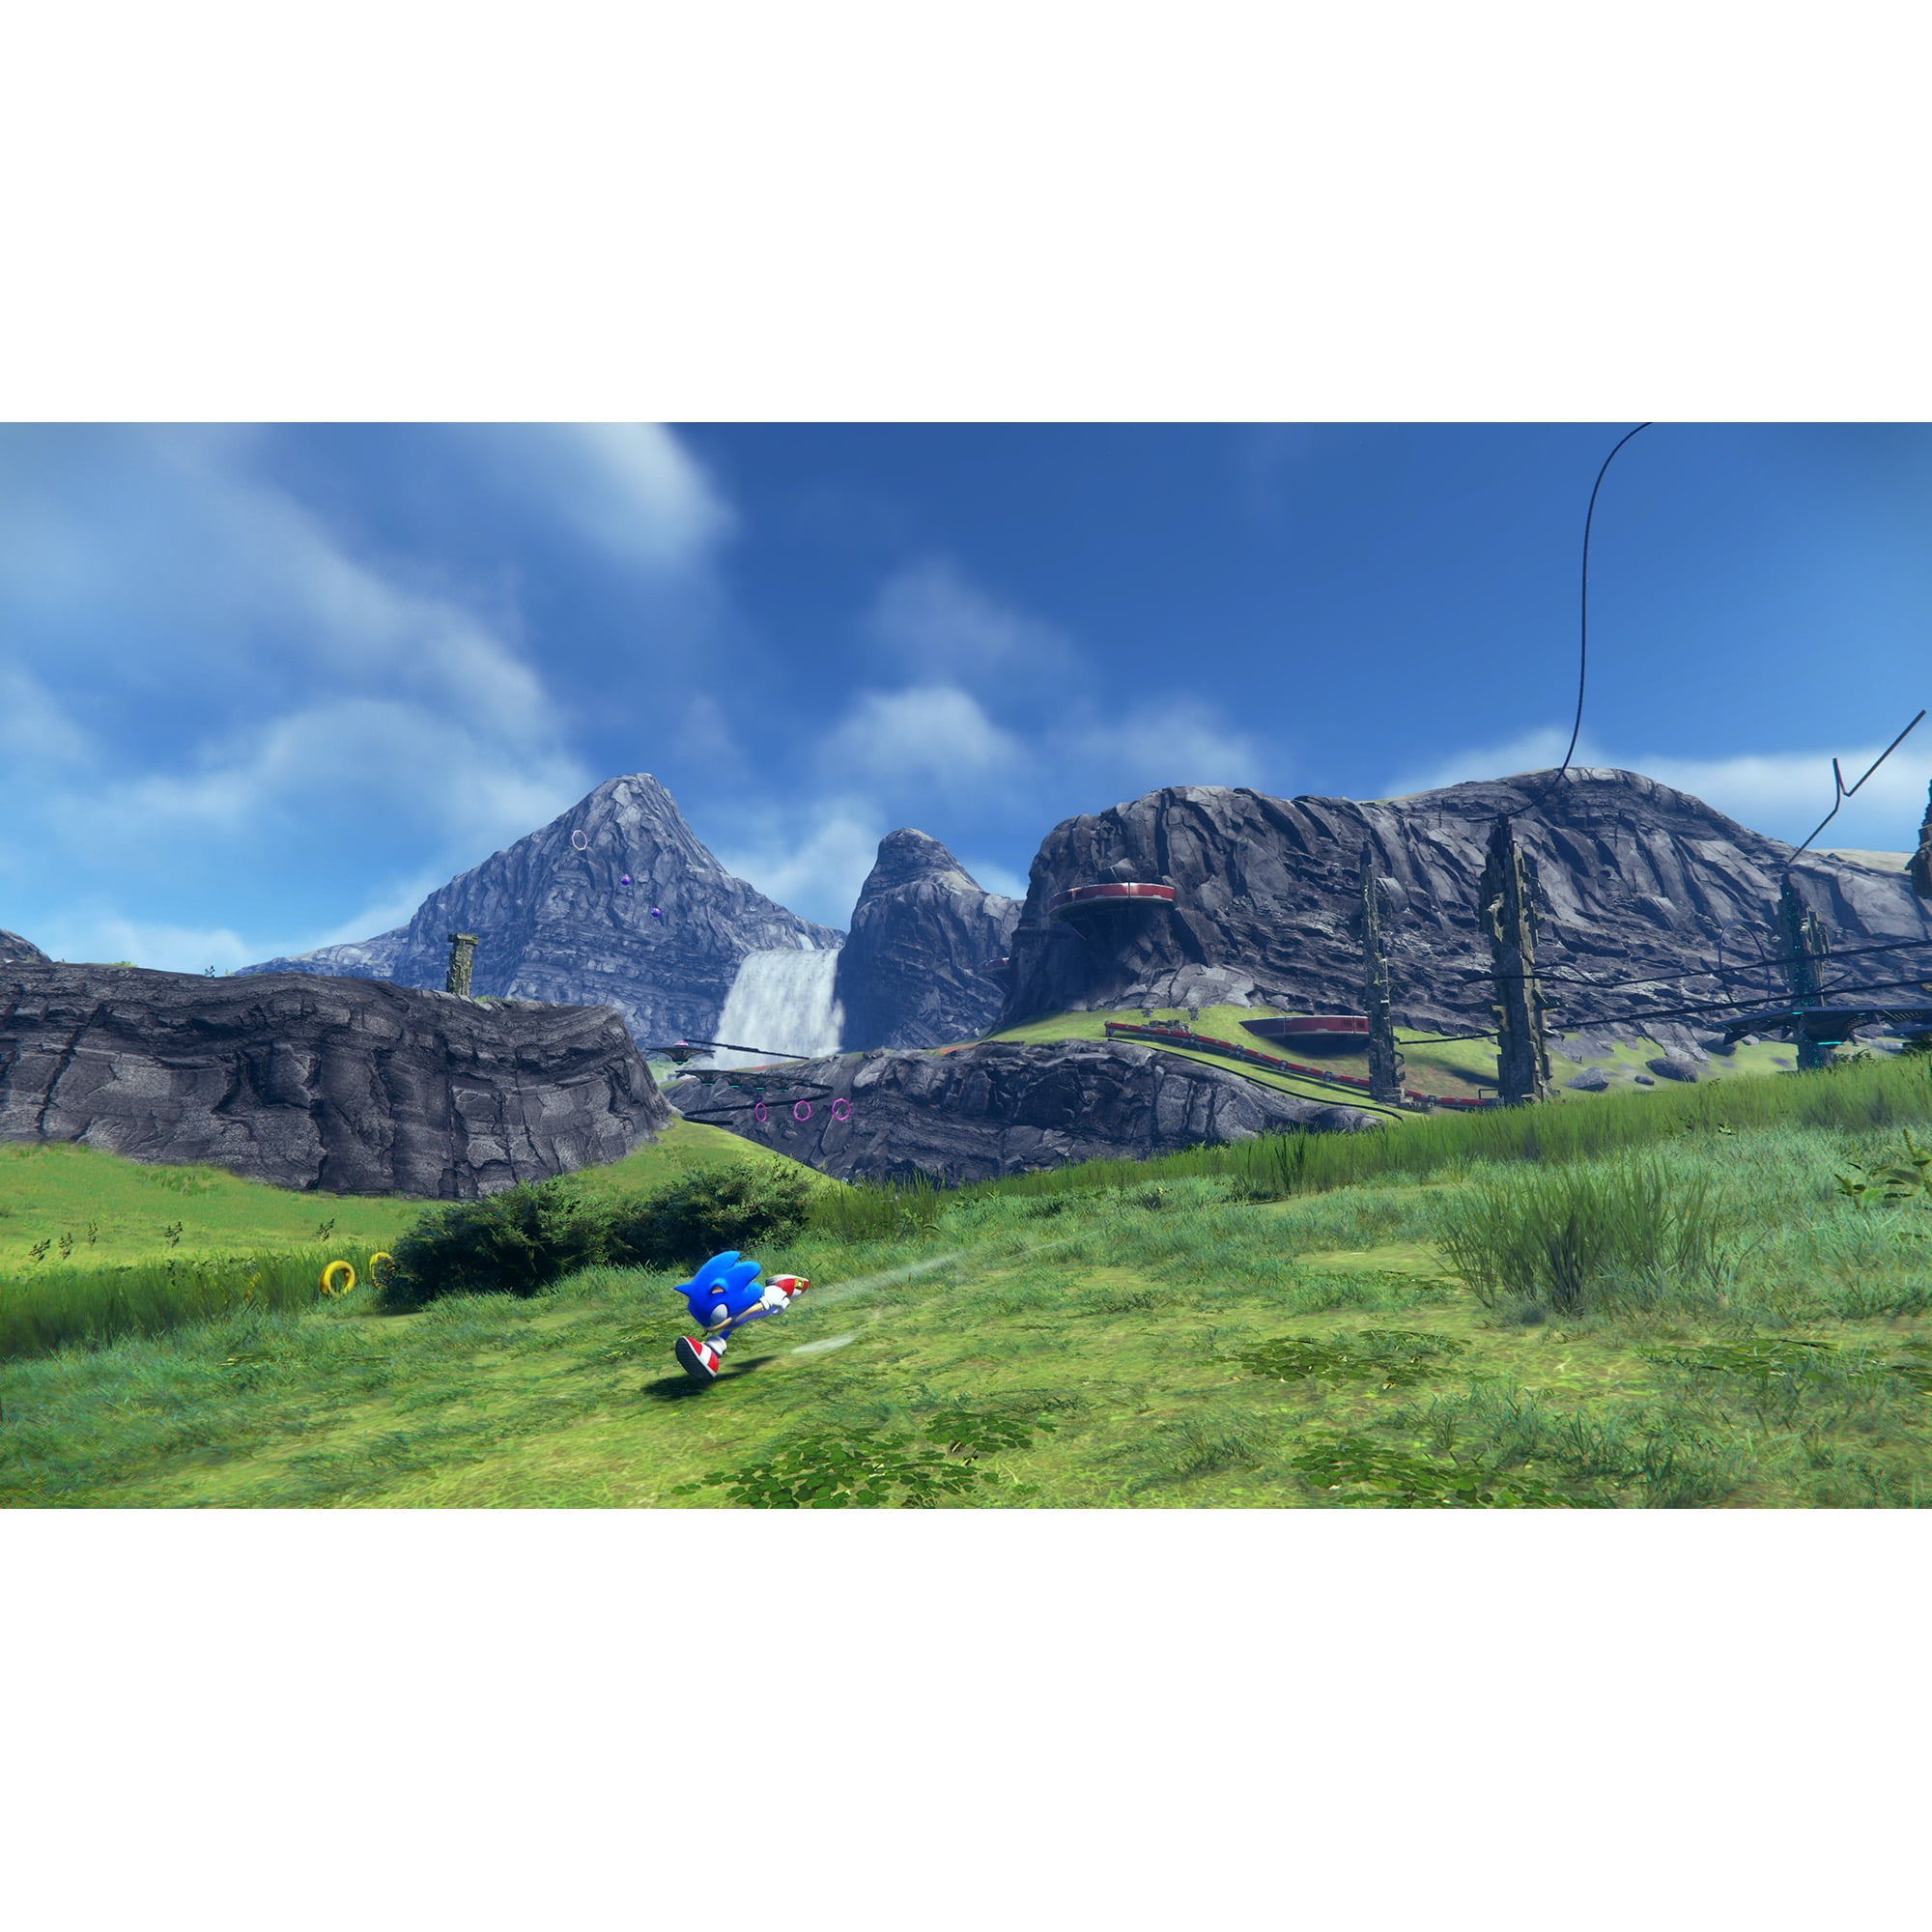 Sonic Frontiers (PS5) (5 stores) see best prices now »